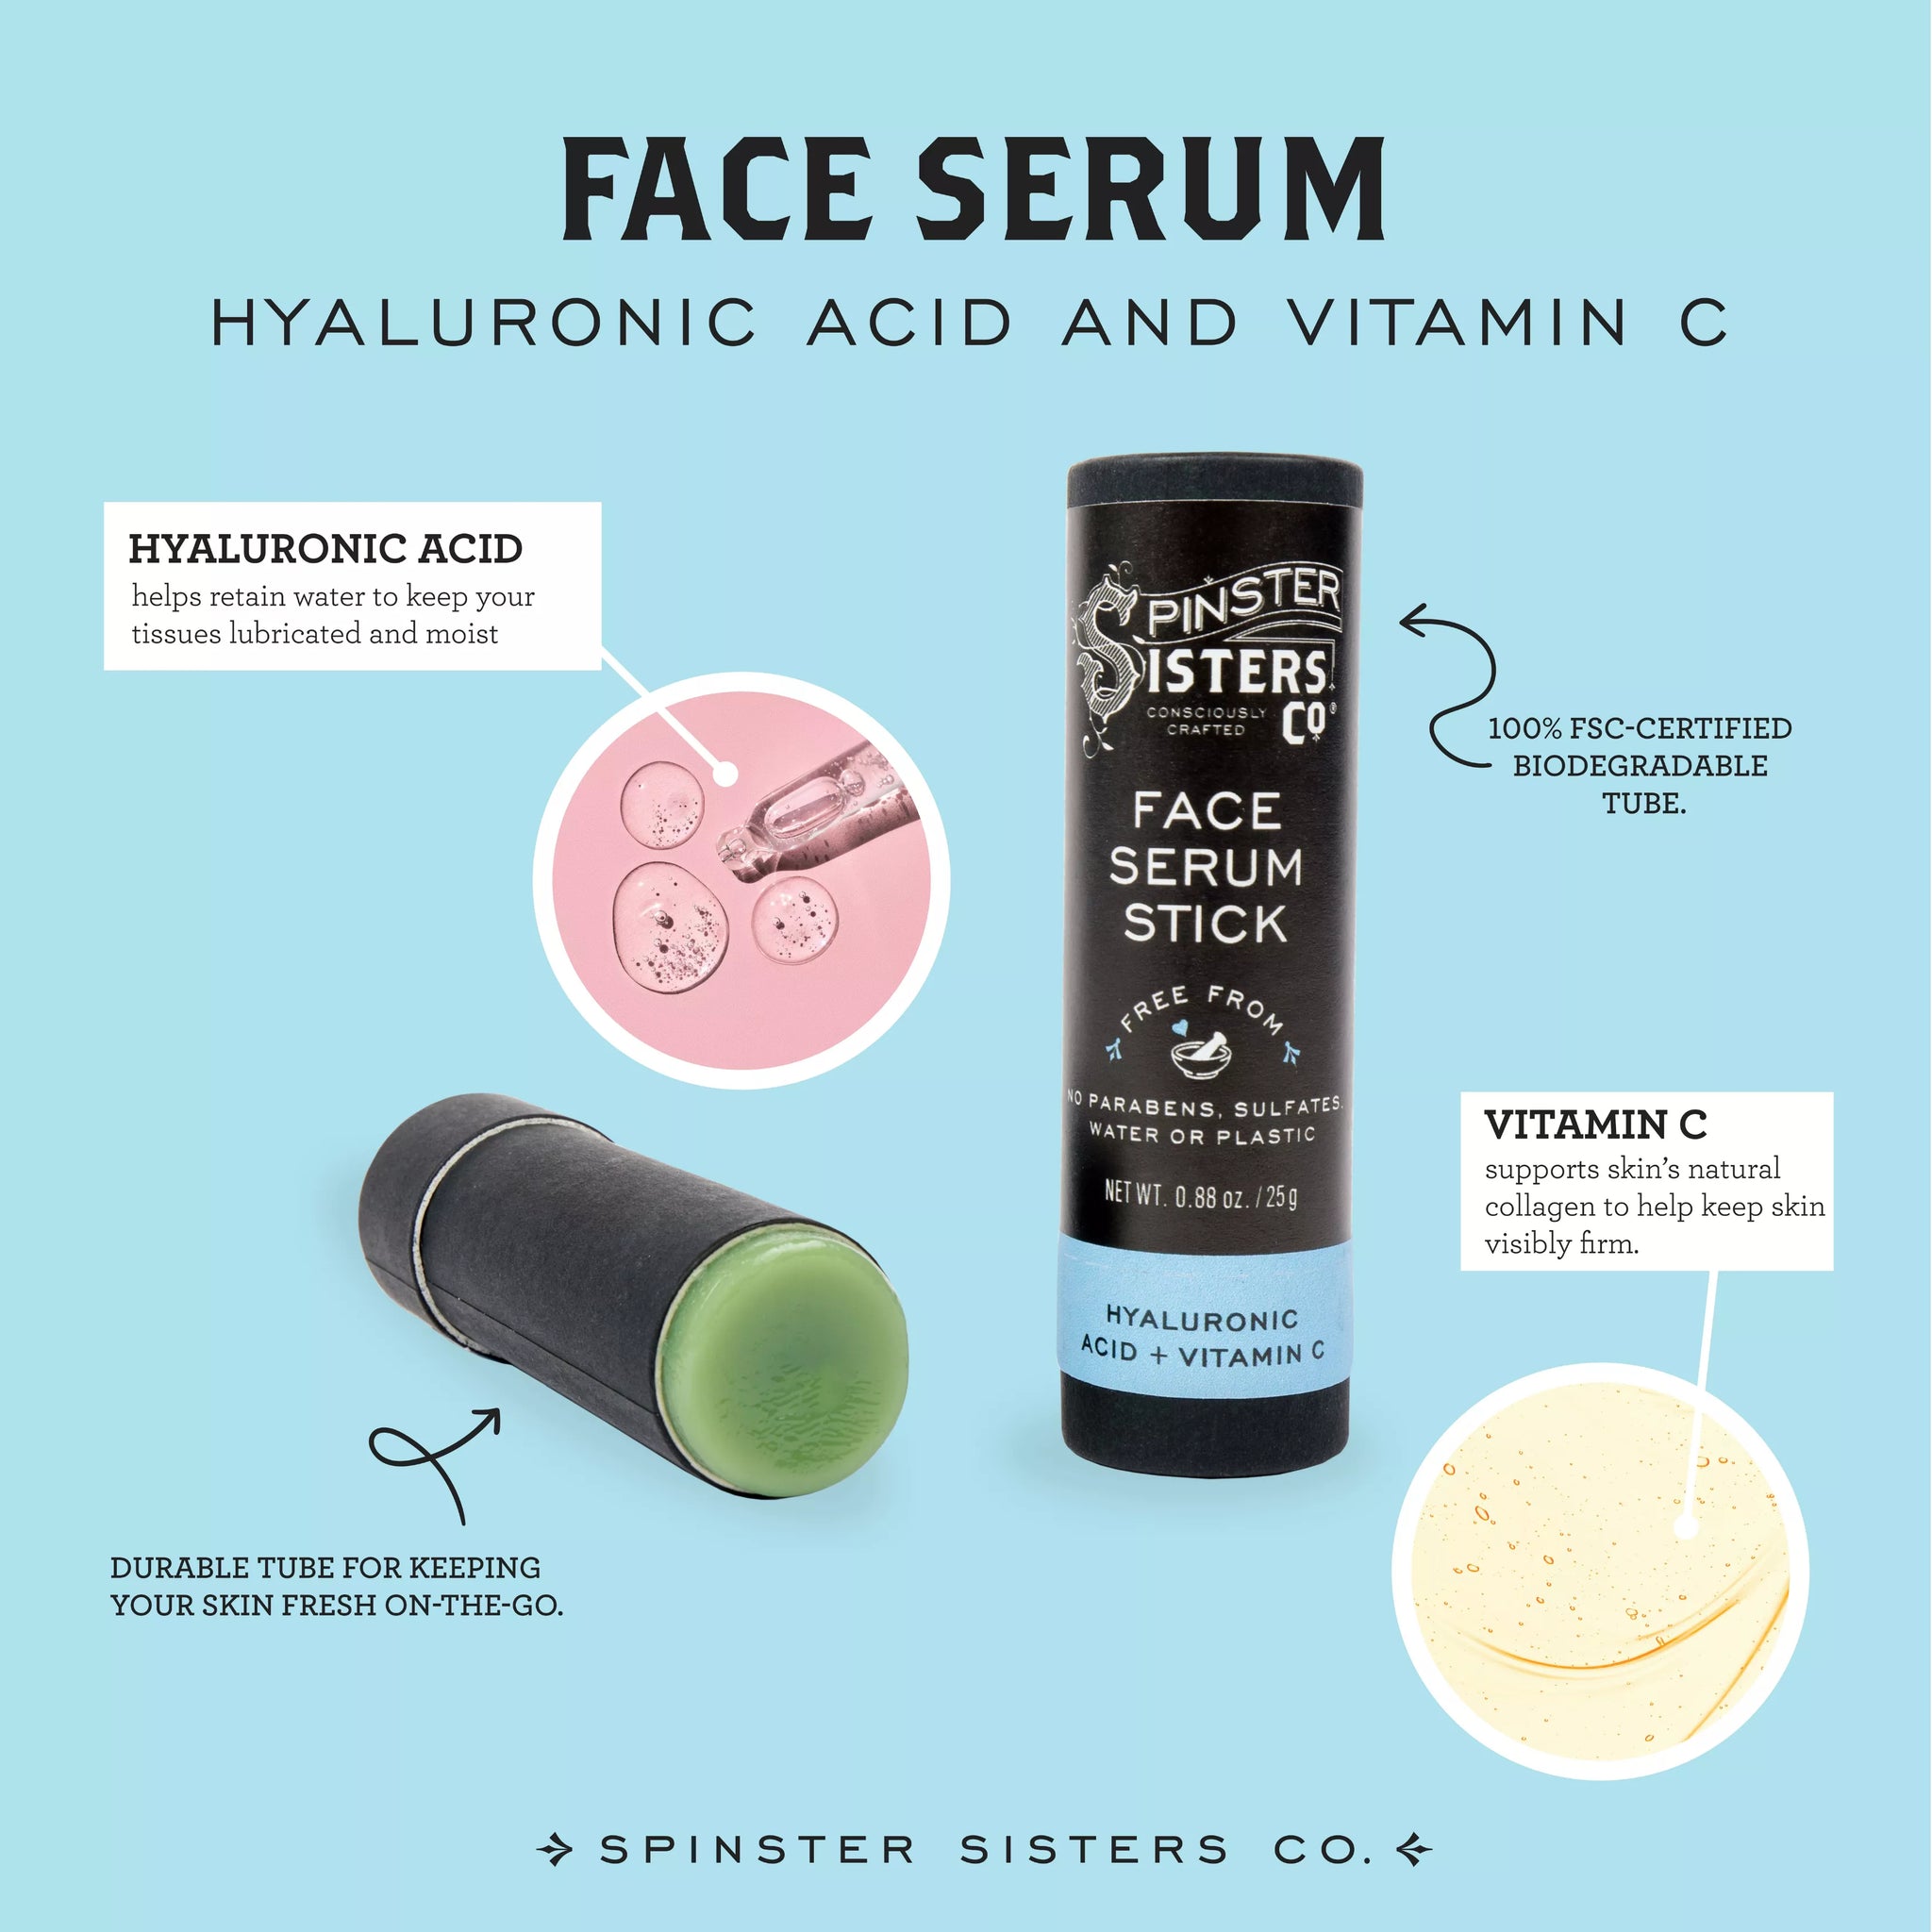 Face Serum Stick with Hyaluronic Acid + Vitamin C